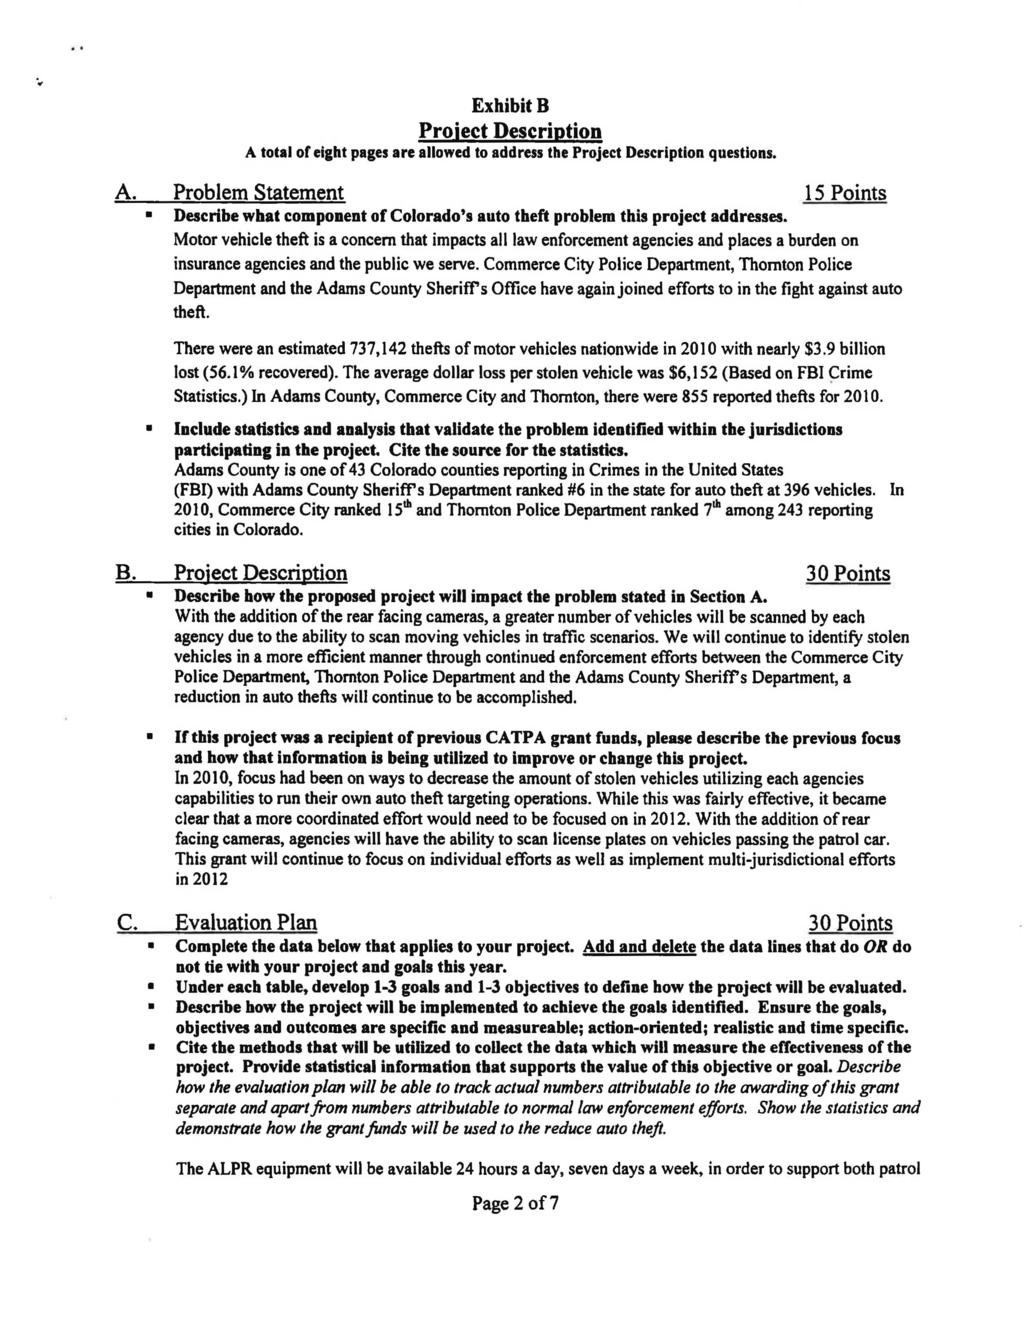 A. ExhibitB Project Description A total of eight pages are allowed to address the Project Description questions.